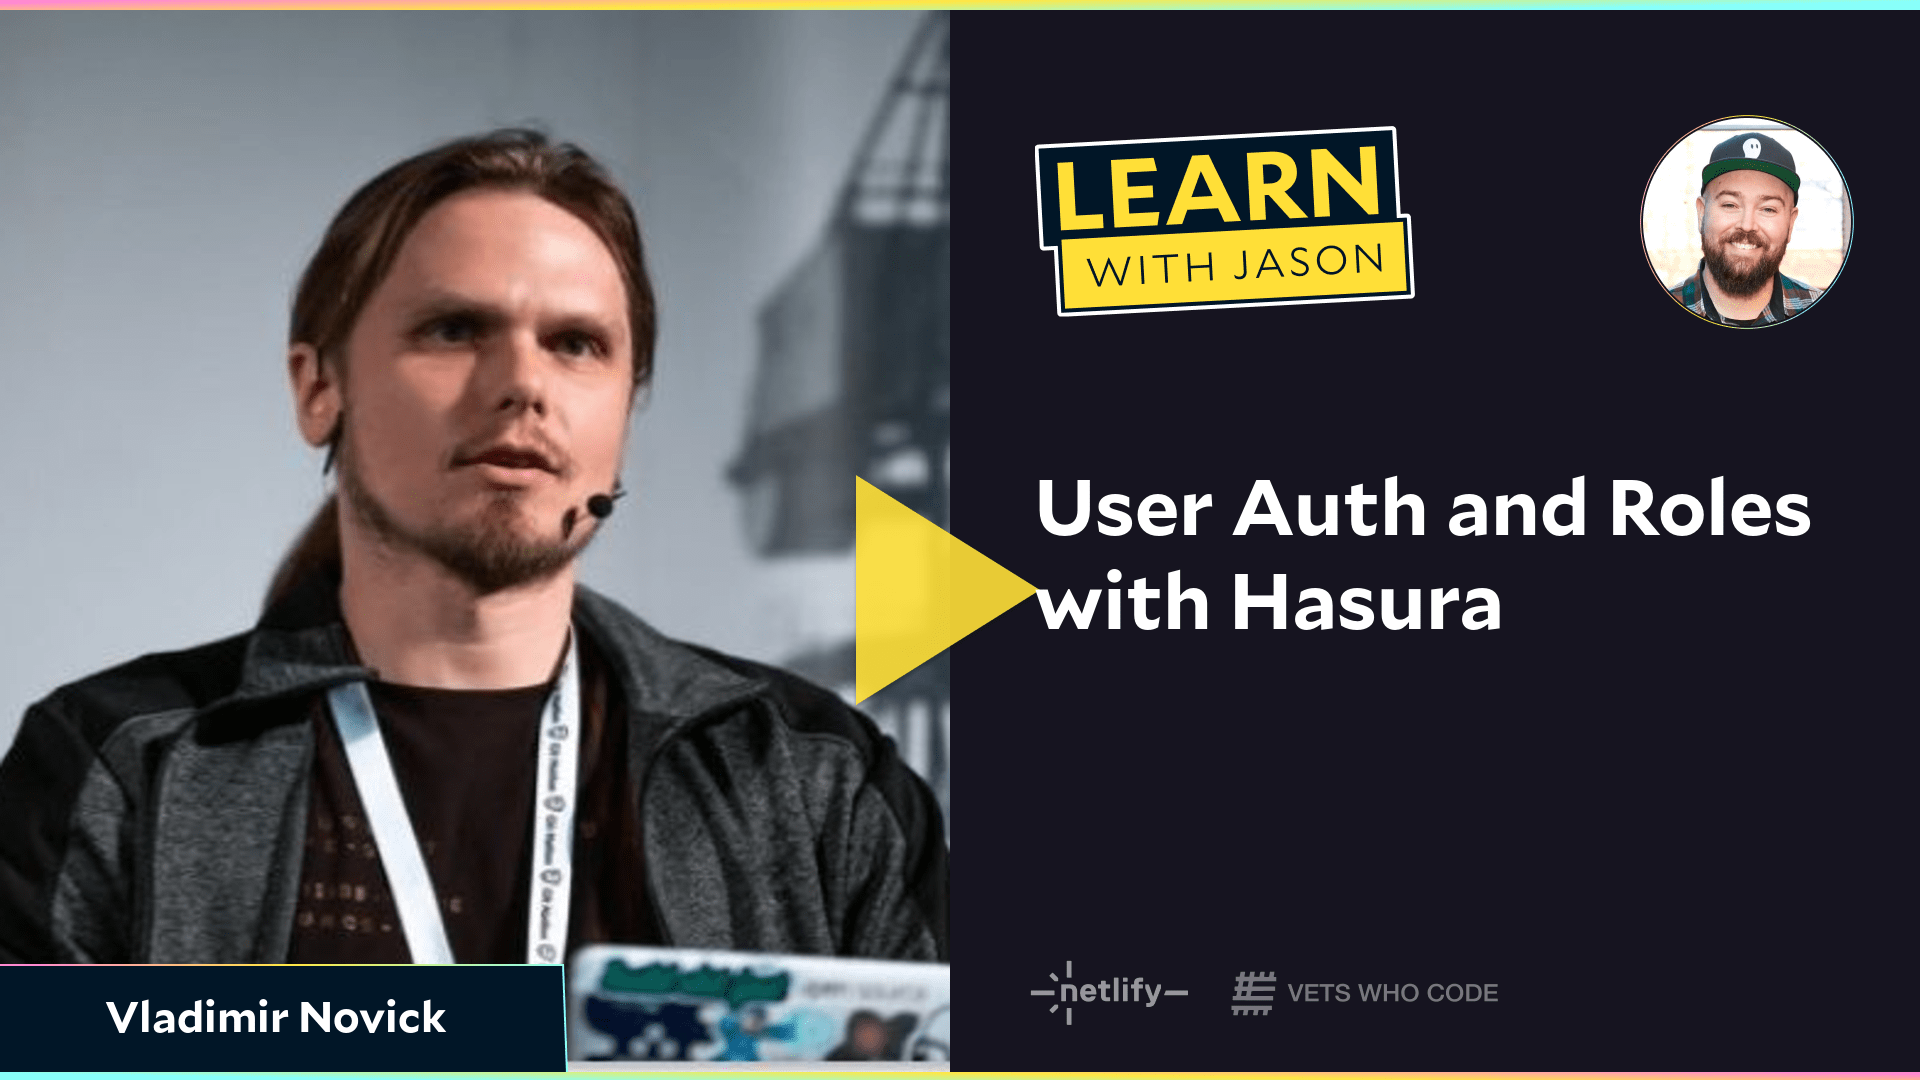 User Auth and Roles with Hasura (with Vladimir Novick)